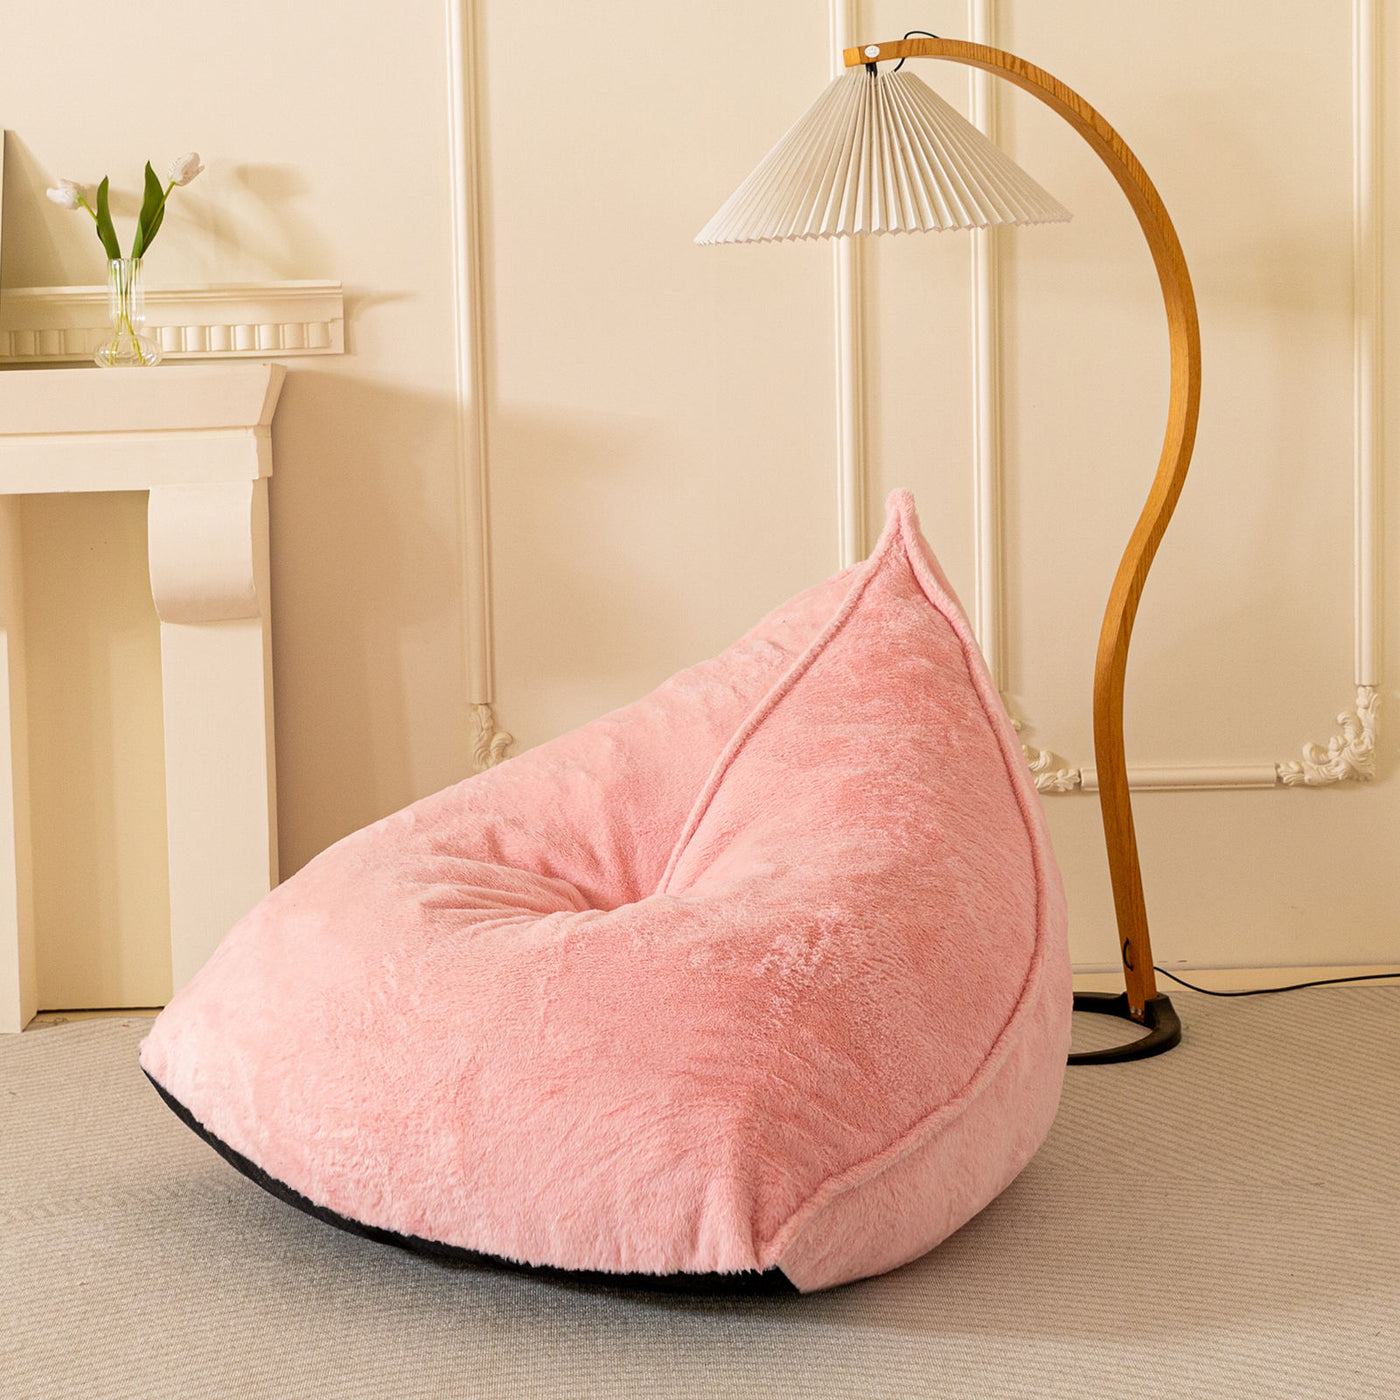 MAXYOYO Bean Bag Chairs for Adults, Giant Faux Fur Lazy Couch with Filler, Dark Pink